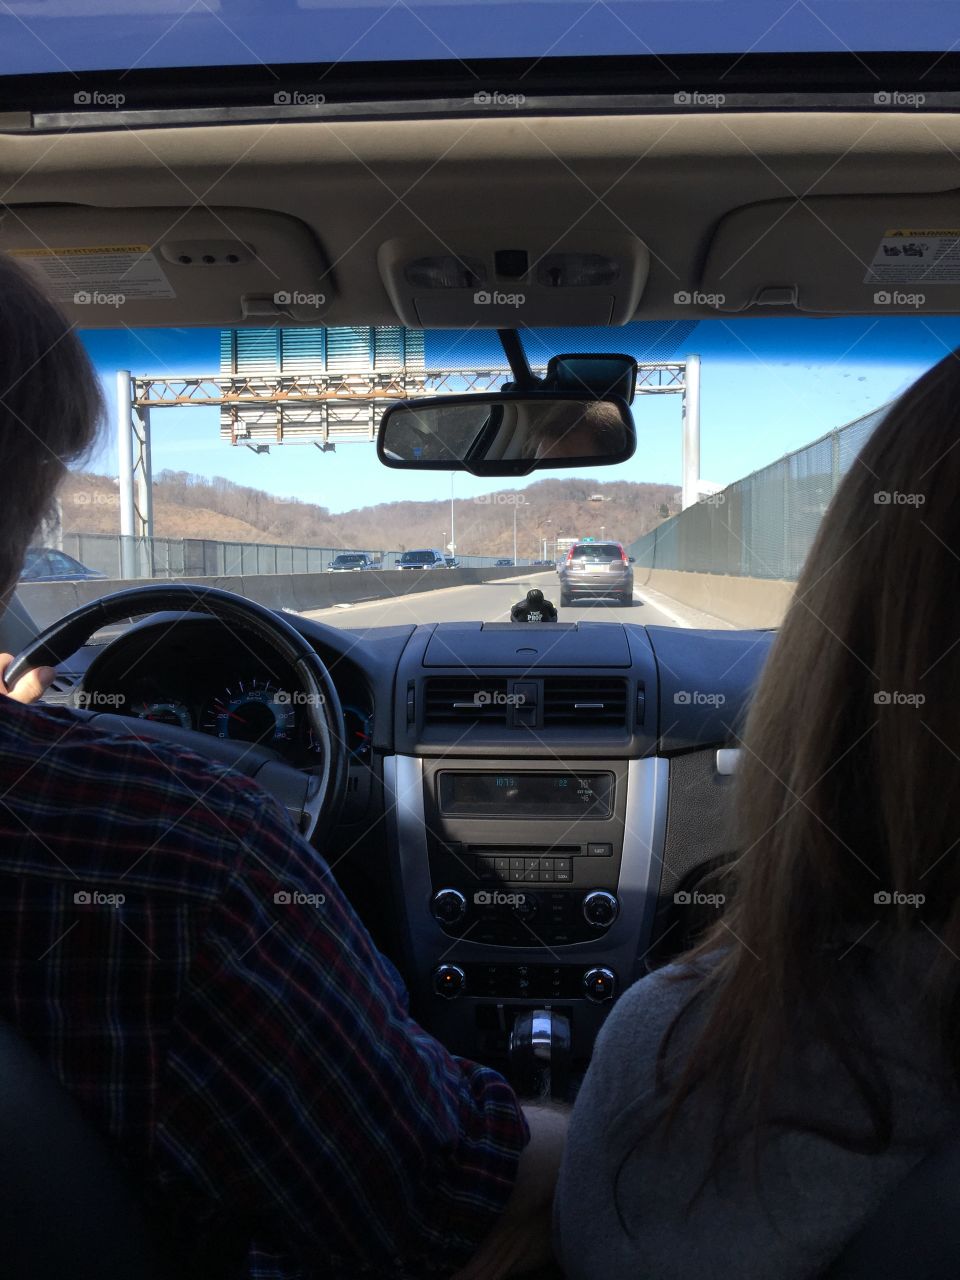 The view of driving down a bridge in the backseat